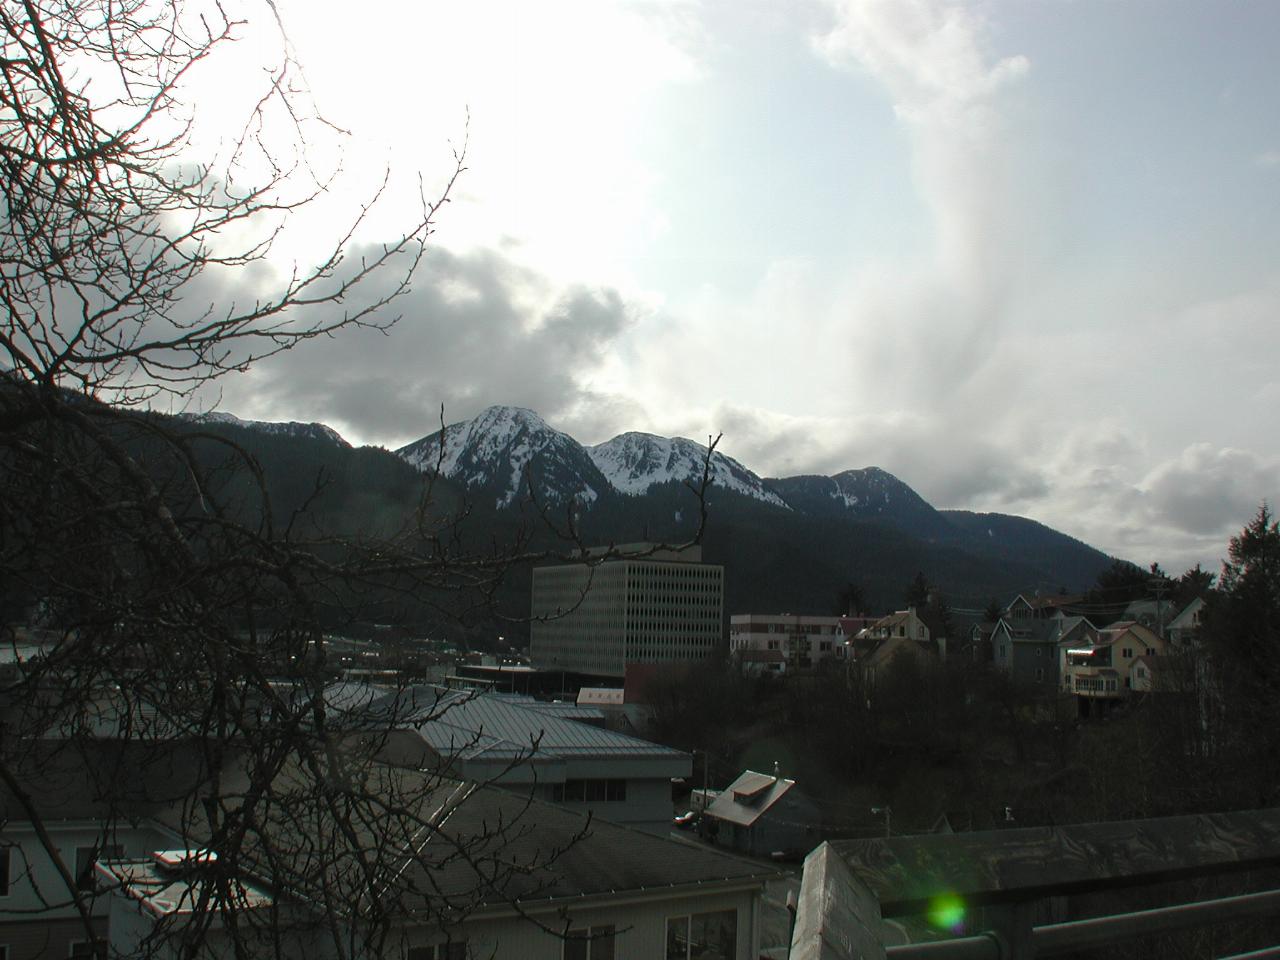 Overview of parts of downtown Juneau